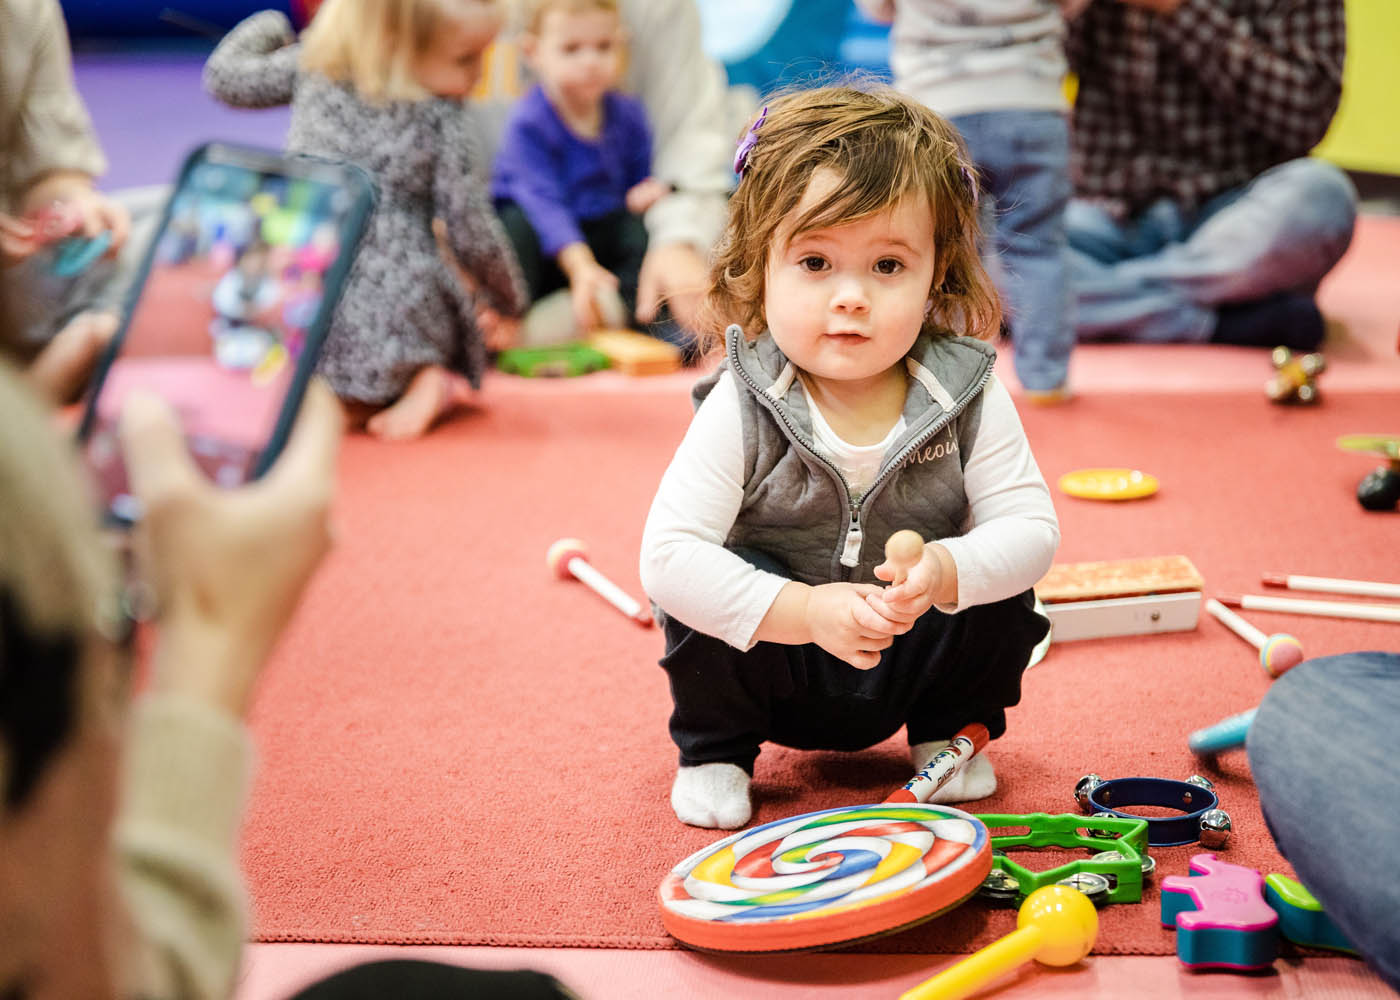 An adorable girl playing with musical instruments, an excellent activity for kids at Romp n' Roll Wethersfield birthday parties.